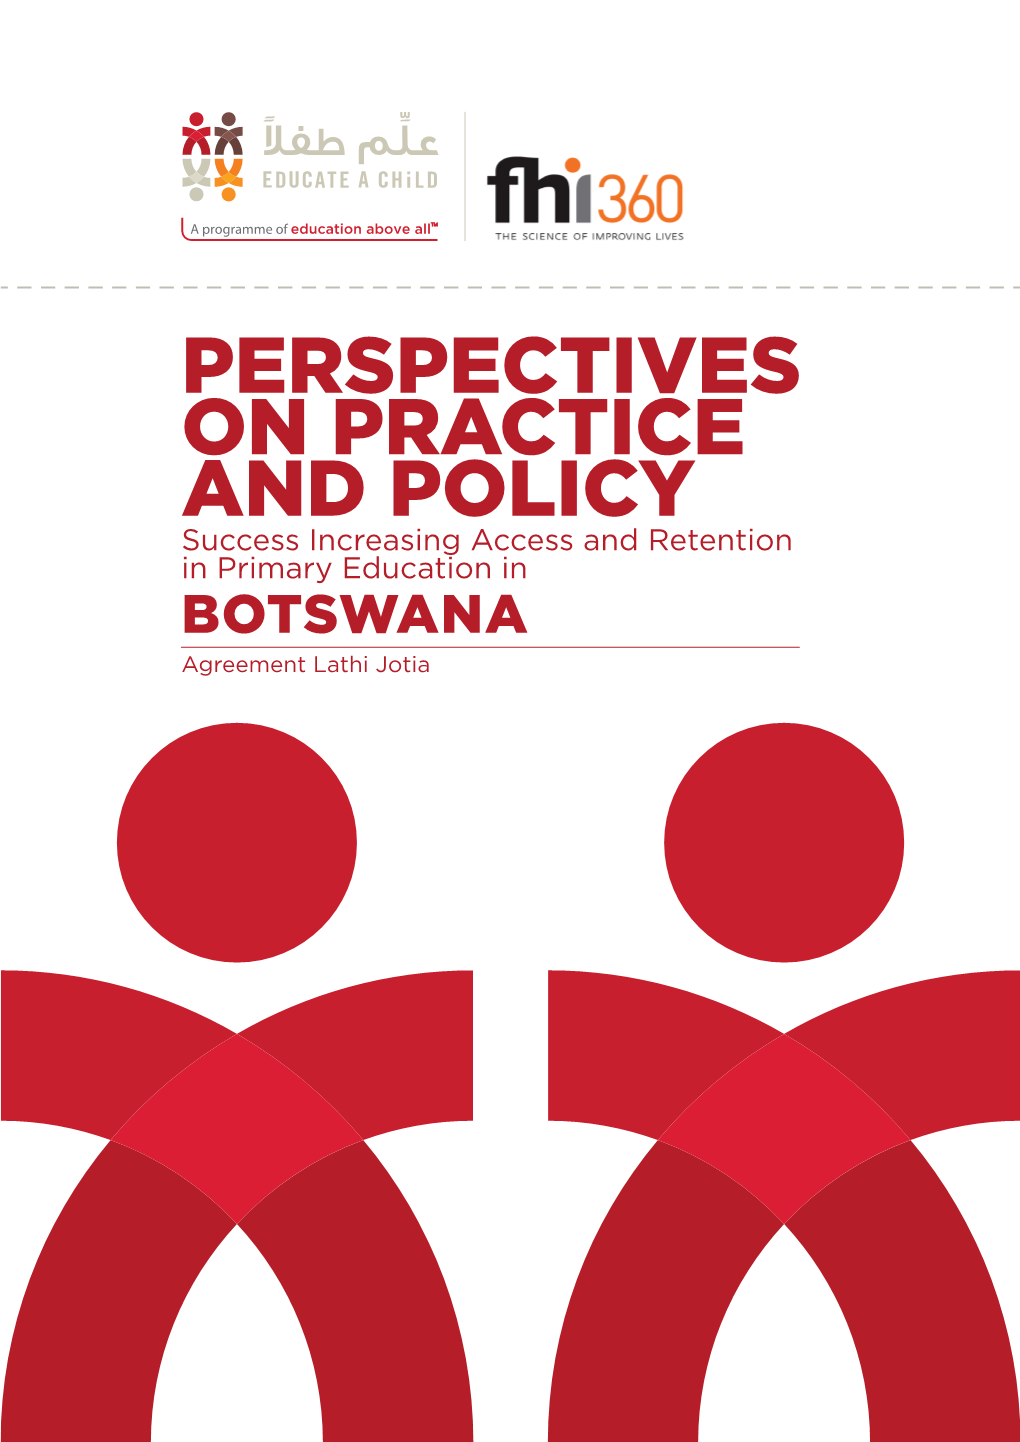 Perspectives on Practice and Policy Success Increasing Access and Retention in Primary Education in Botswana Agreement Lathi Jotia Acknowledgements